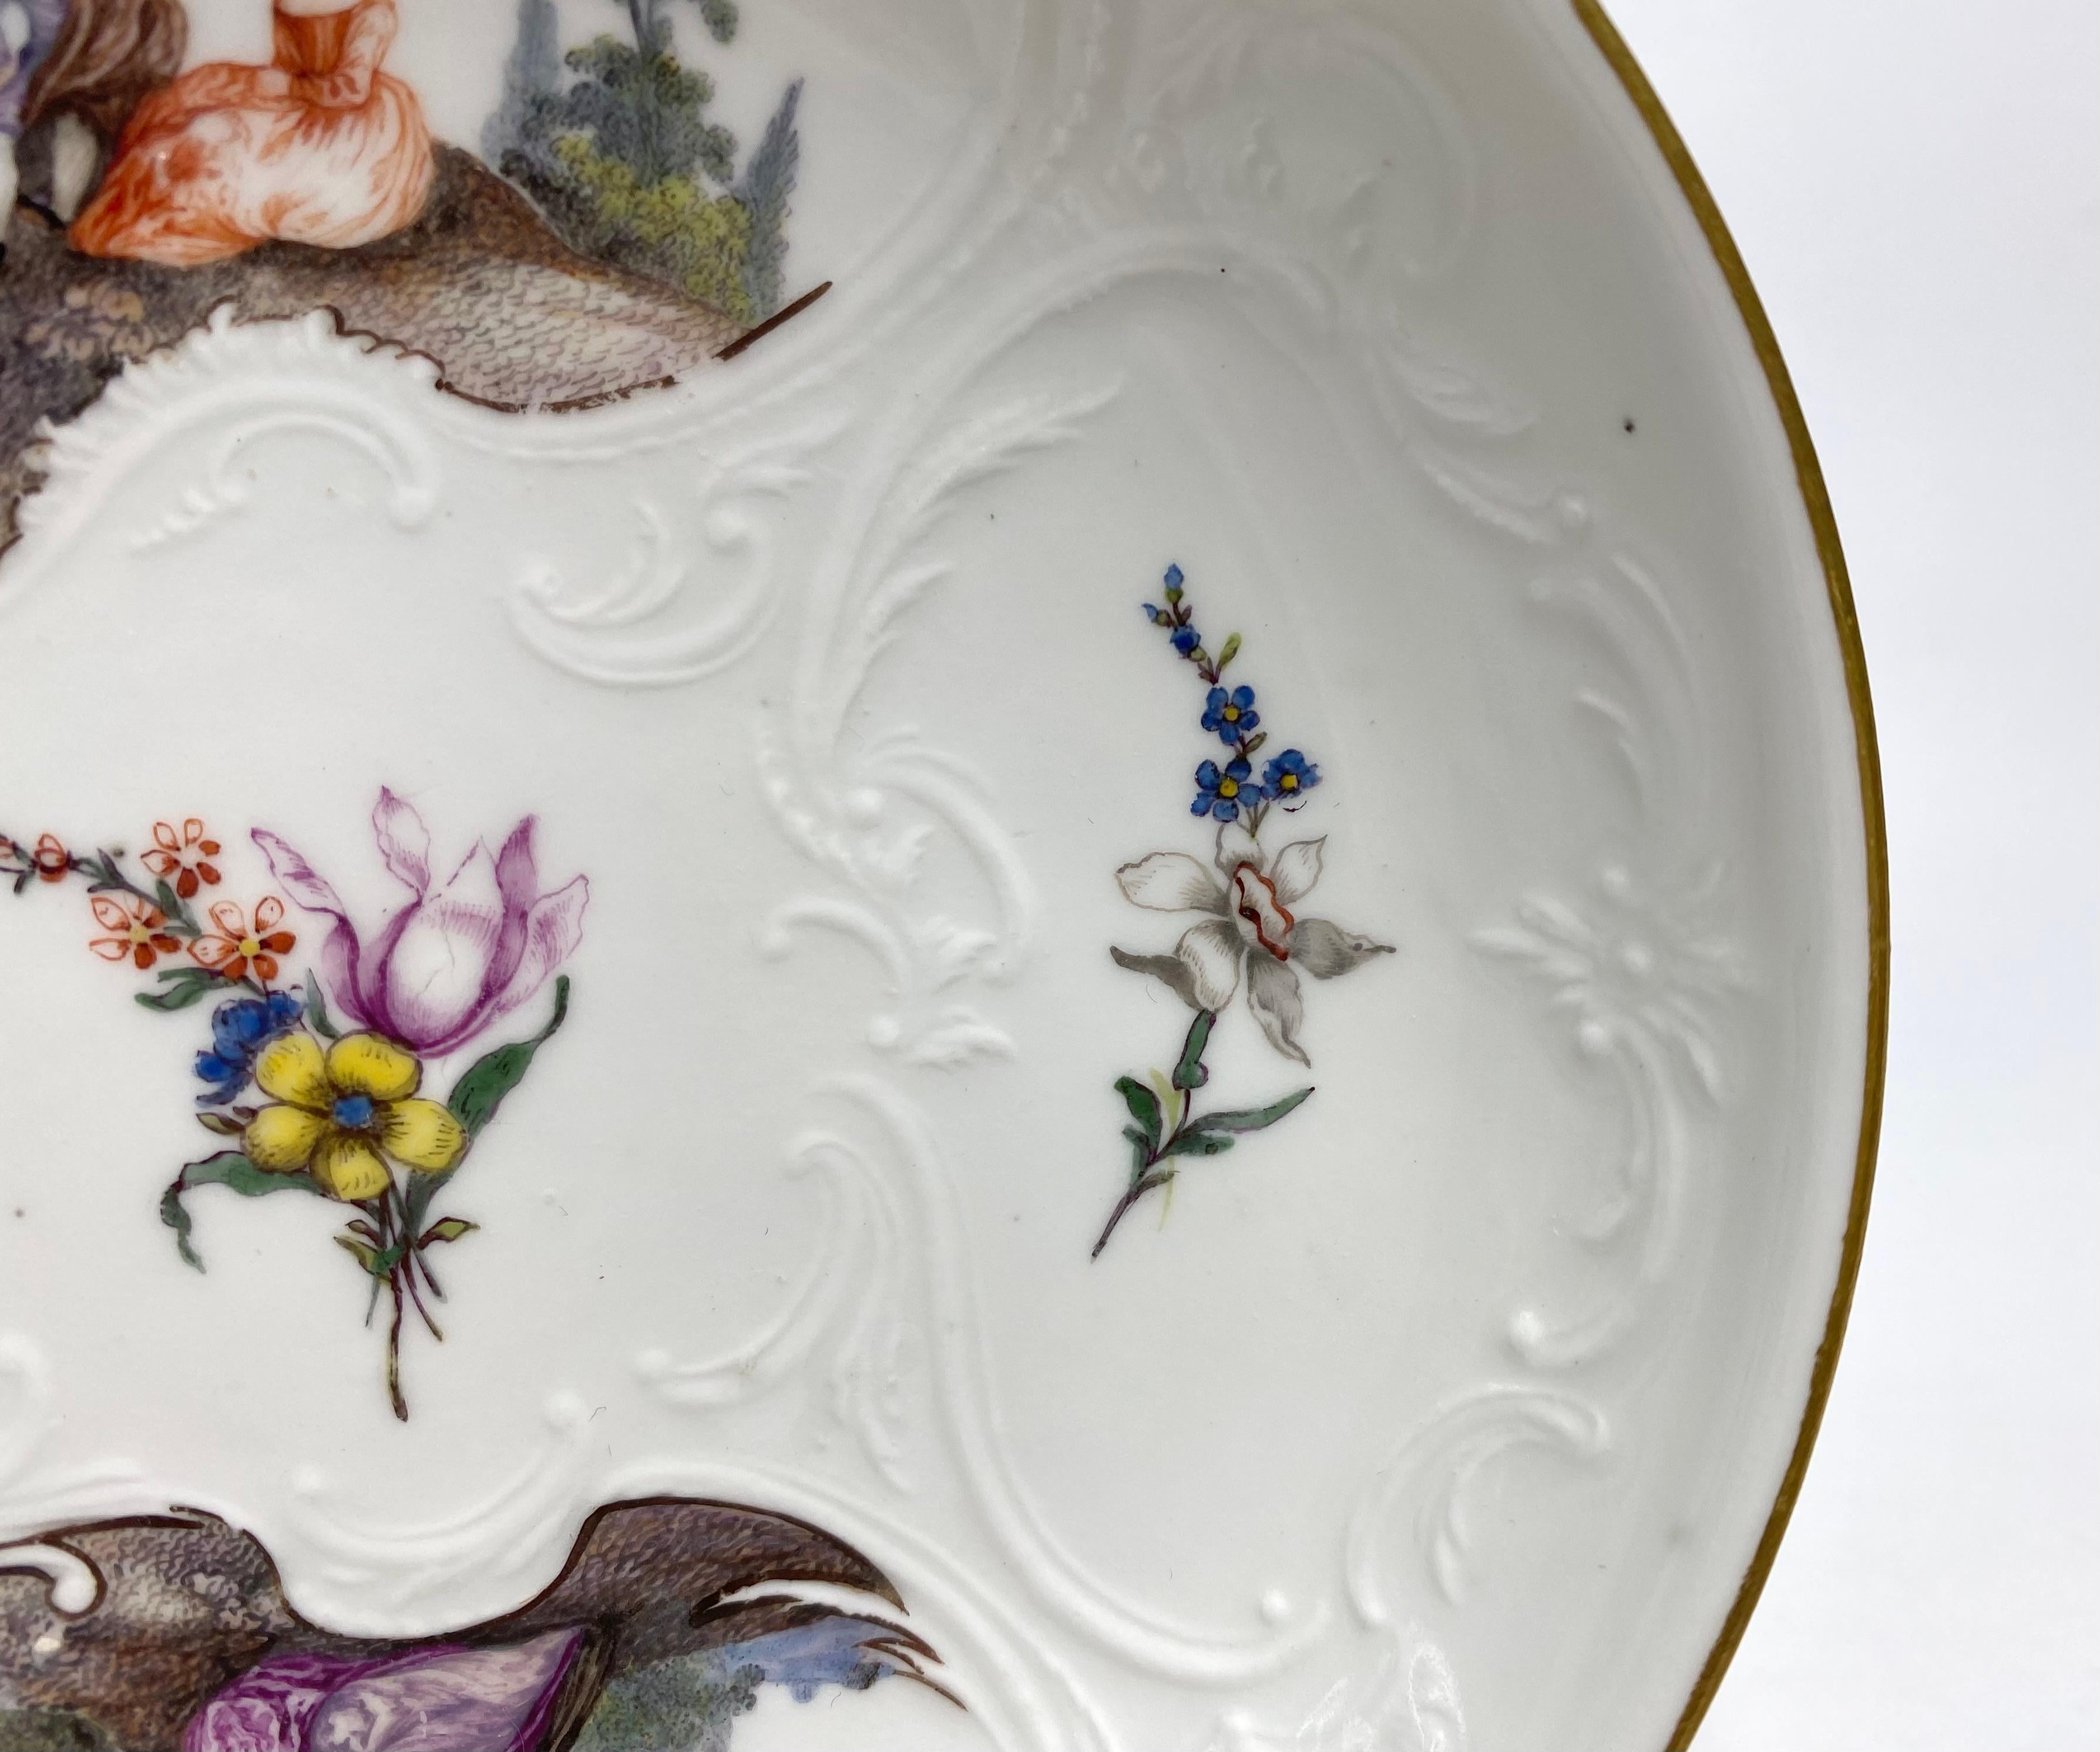 Fired Meissen porcelain cup and saucer, c. 1740.